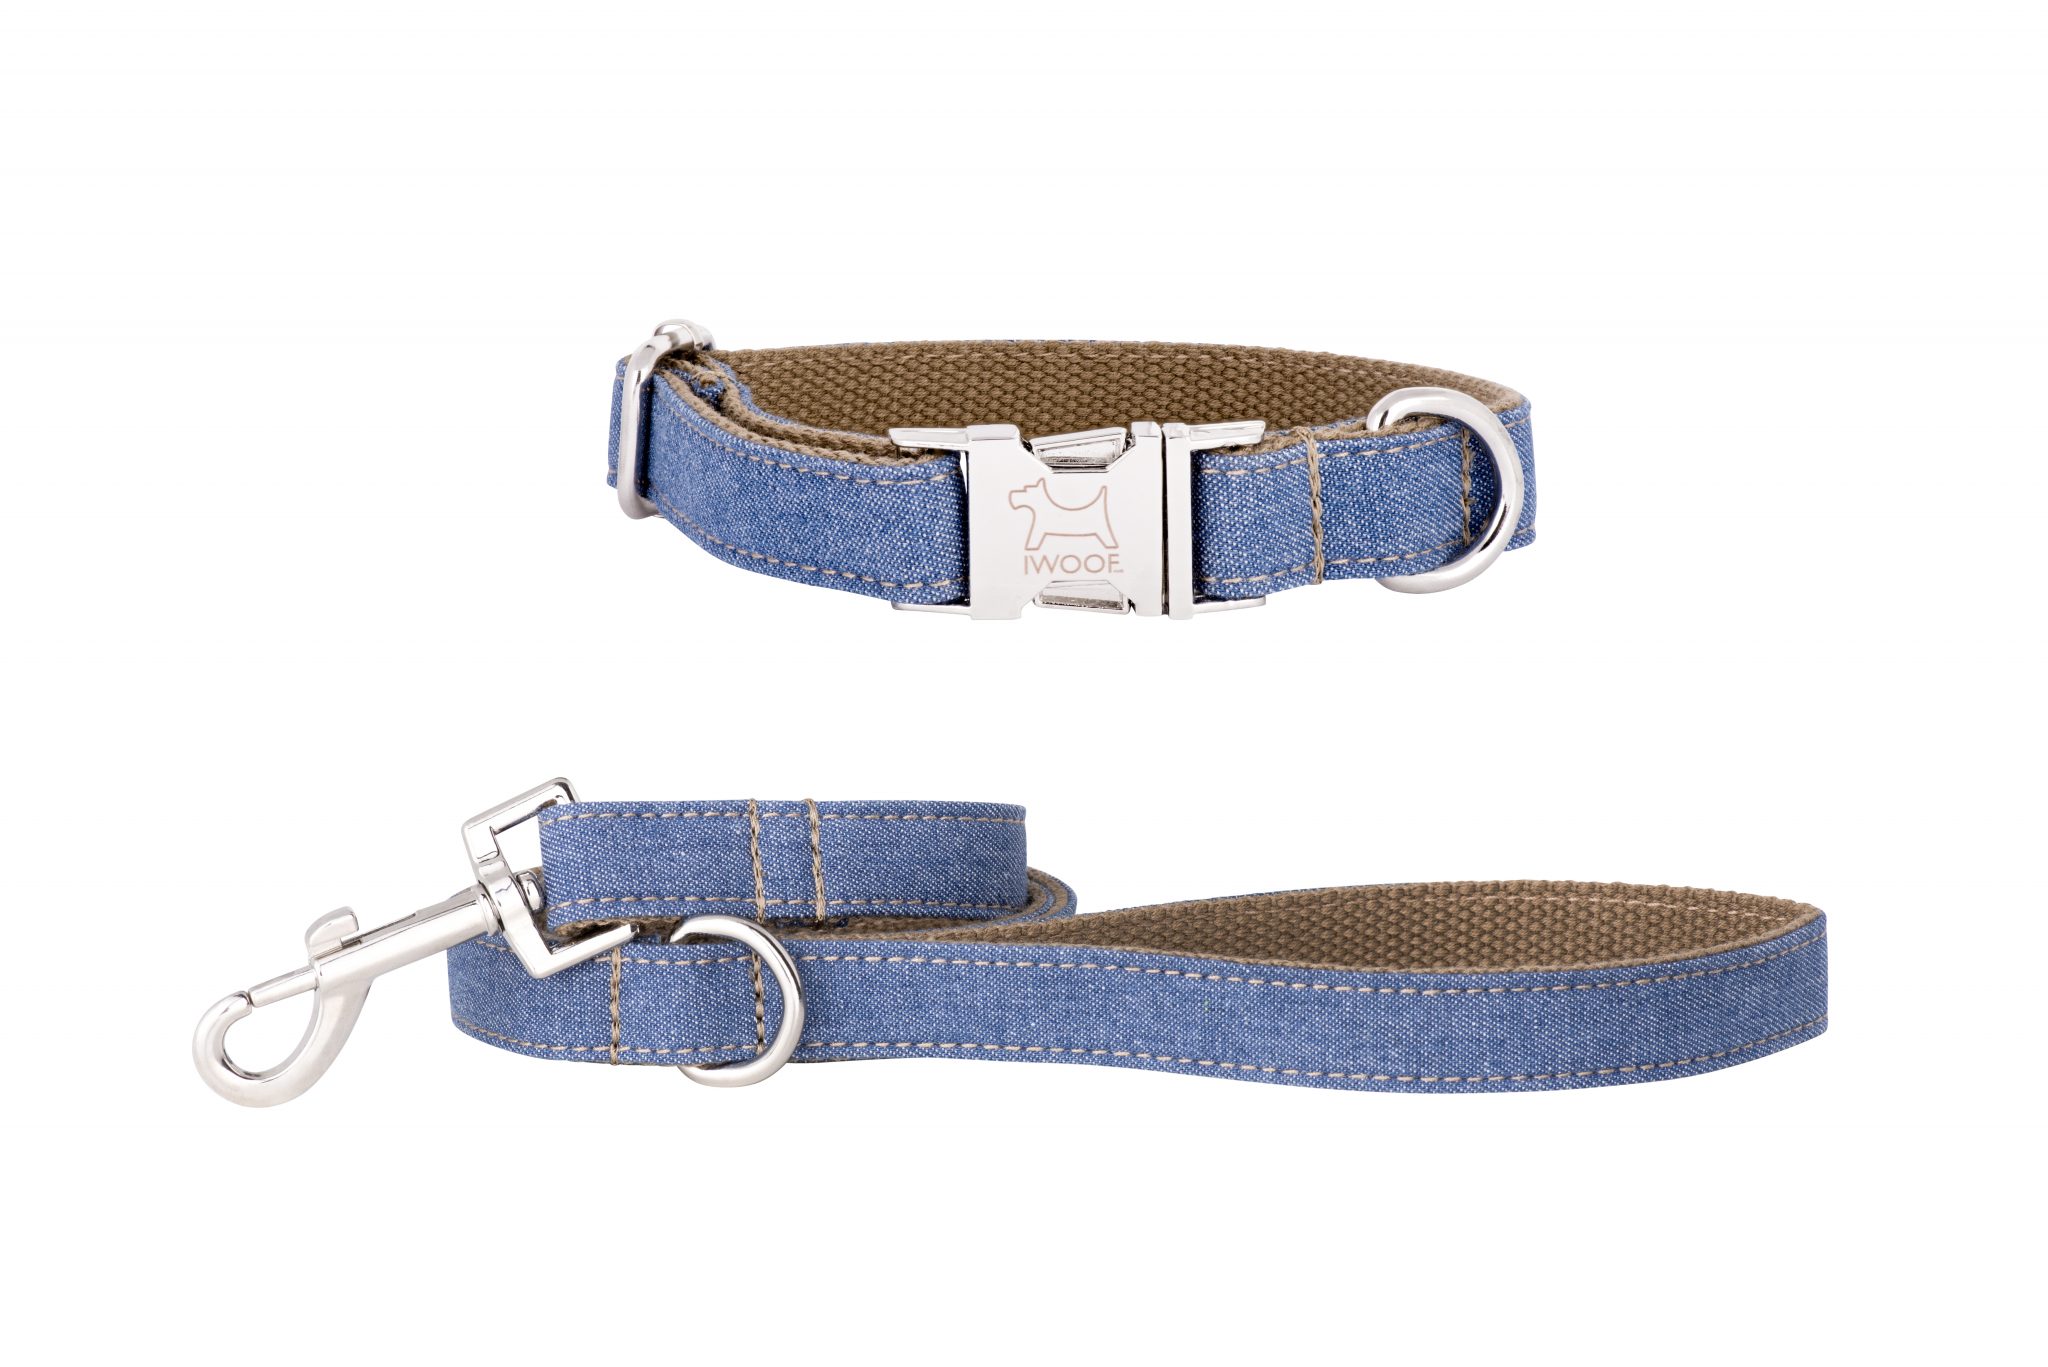 JEAN Designer Dog Collar and Lead set in silver